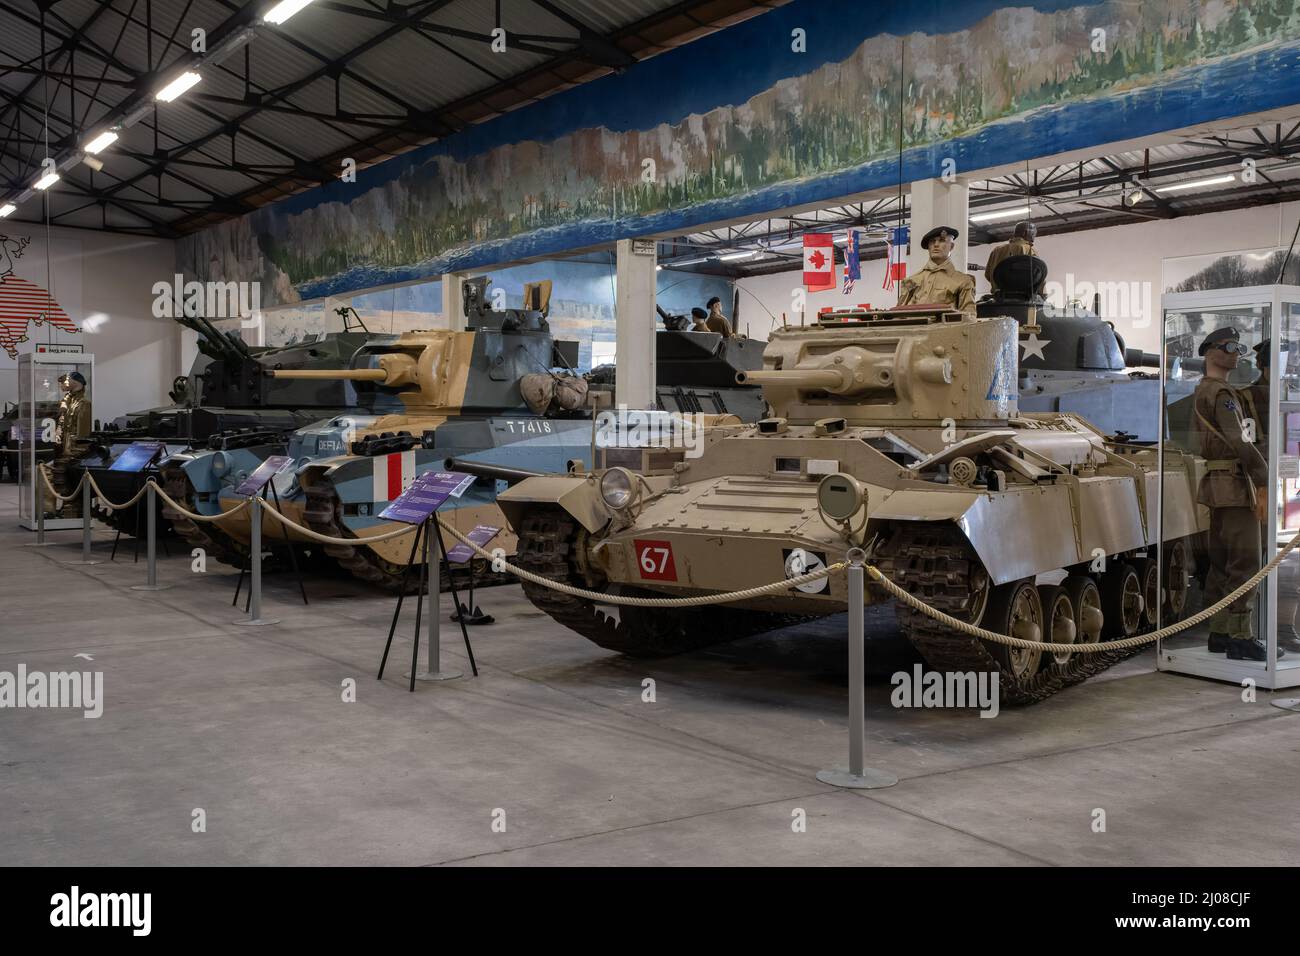 Saumur, France - February 26, 2022:  Allies armoured vehicles and weapons at the tank museum in Saumur (Musee des Blindes). Second world war exhibitio Stock Photo